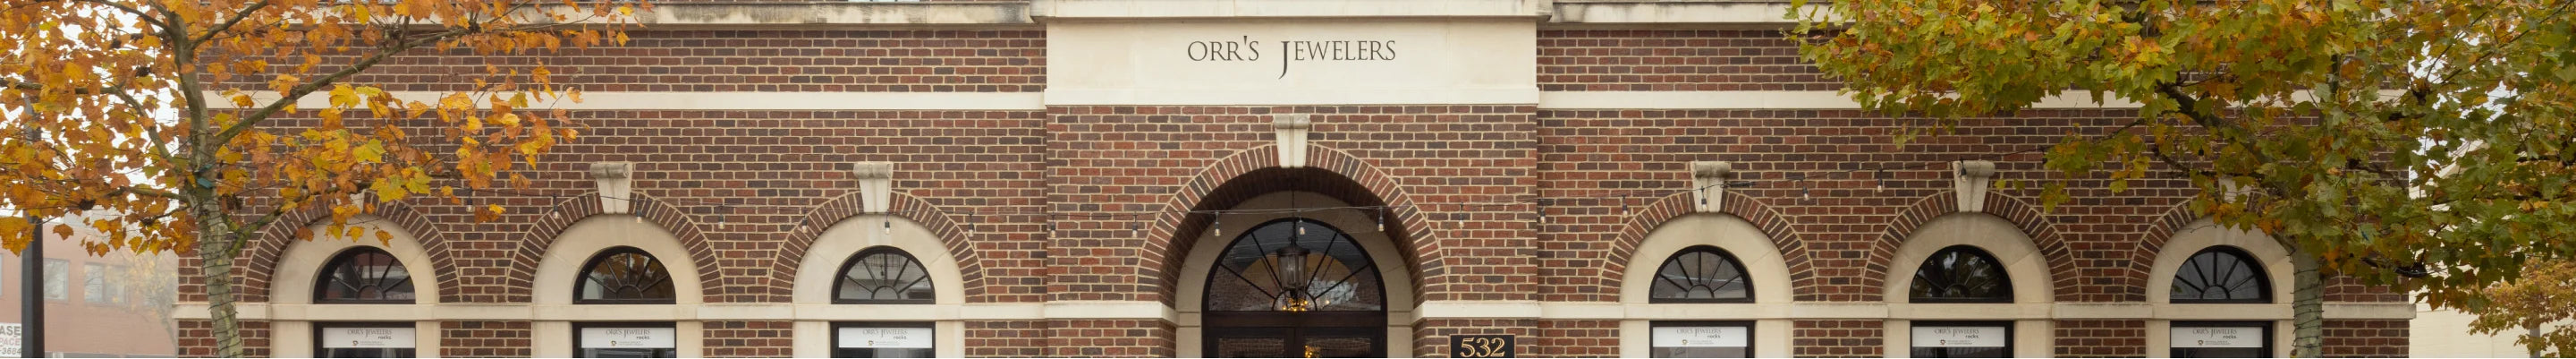 Contact at Orr's Jewelers in Sewickley, PA